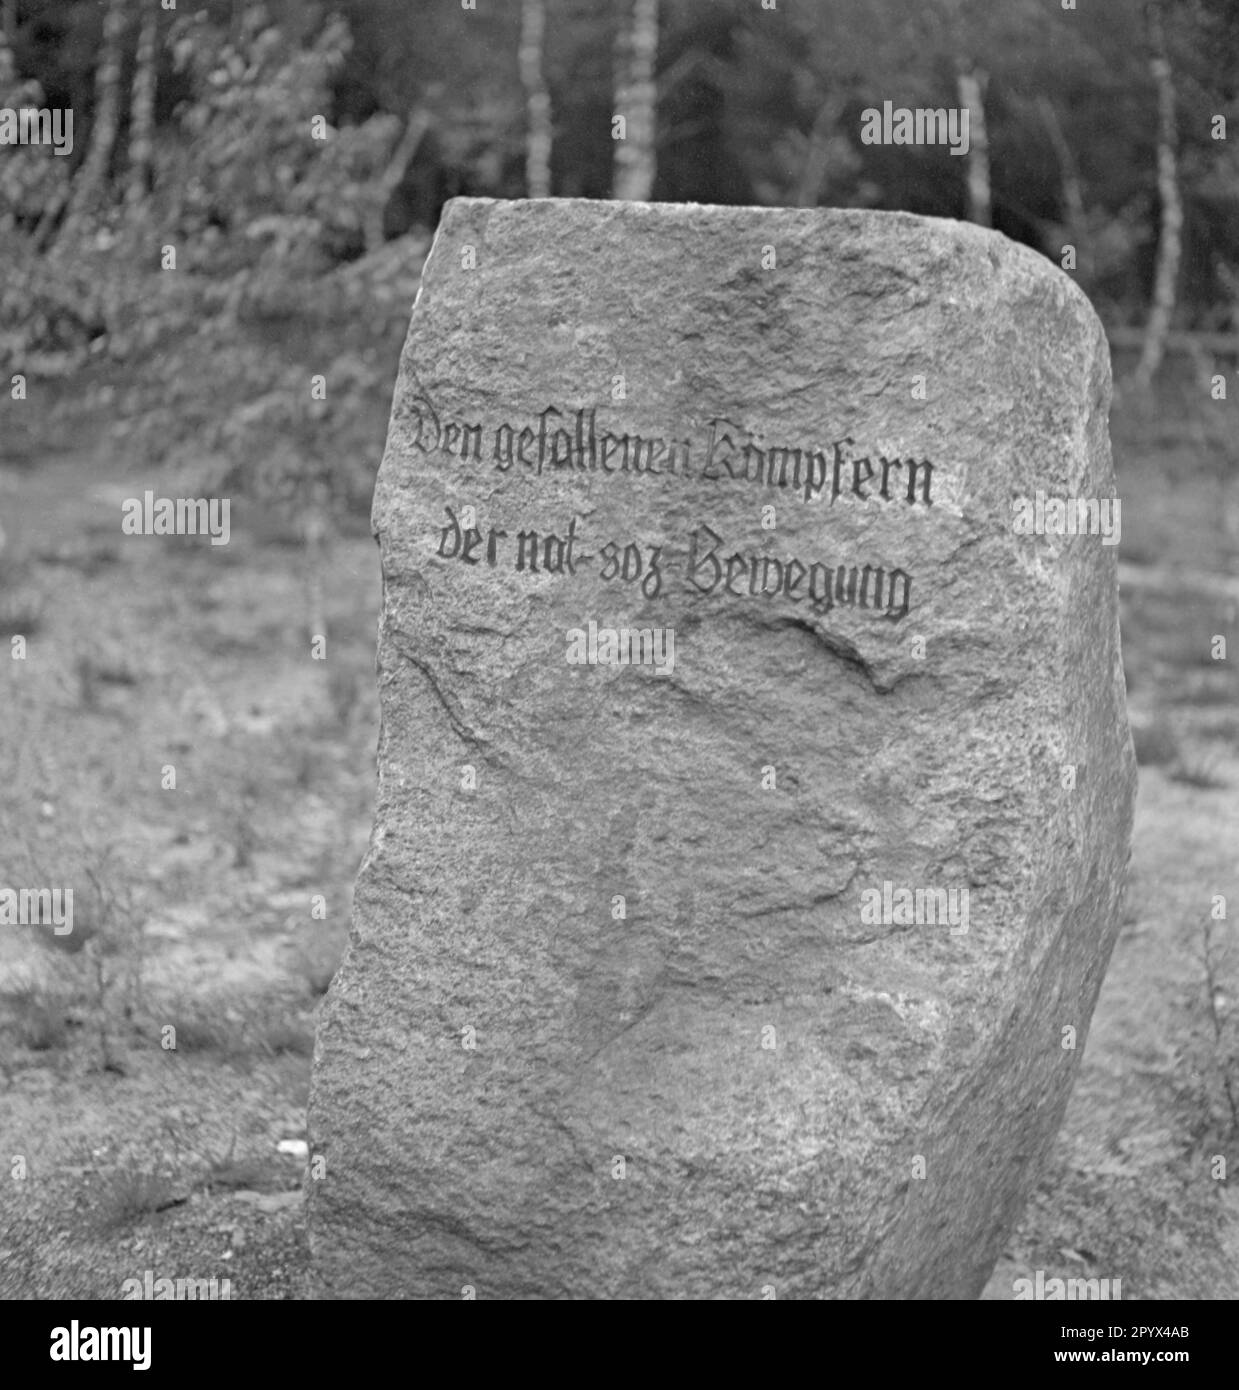 Photo of a memorial stone (glacial erratic) at the Landtagsplatz in Hoesseringen near Suderburg in the Lueneburg Heath. The stone is serves as a reminder of the victims of the National Socialist movement. The photo was taken on the occasion of the inauguration of the Landtagsplatz by the National Socialists on June 28, 1936. Stock Photo